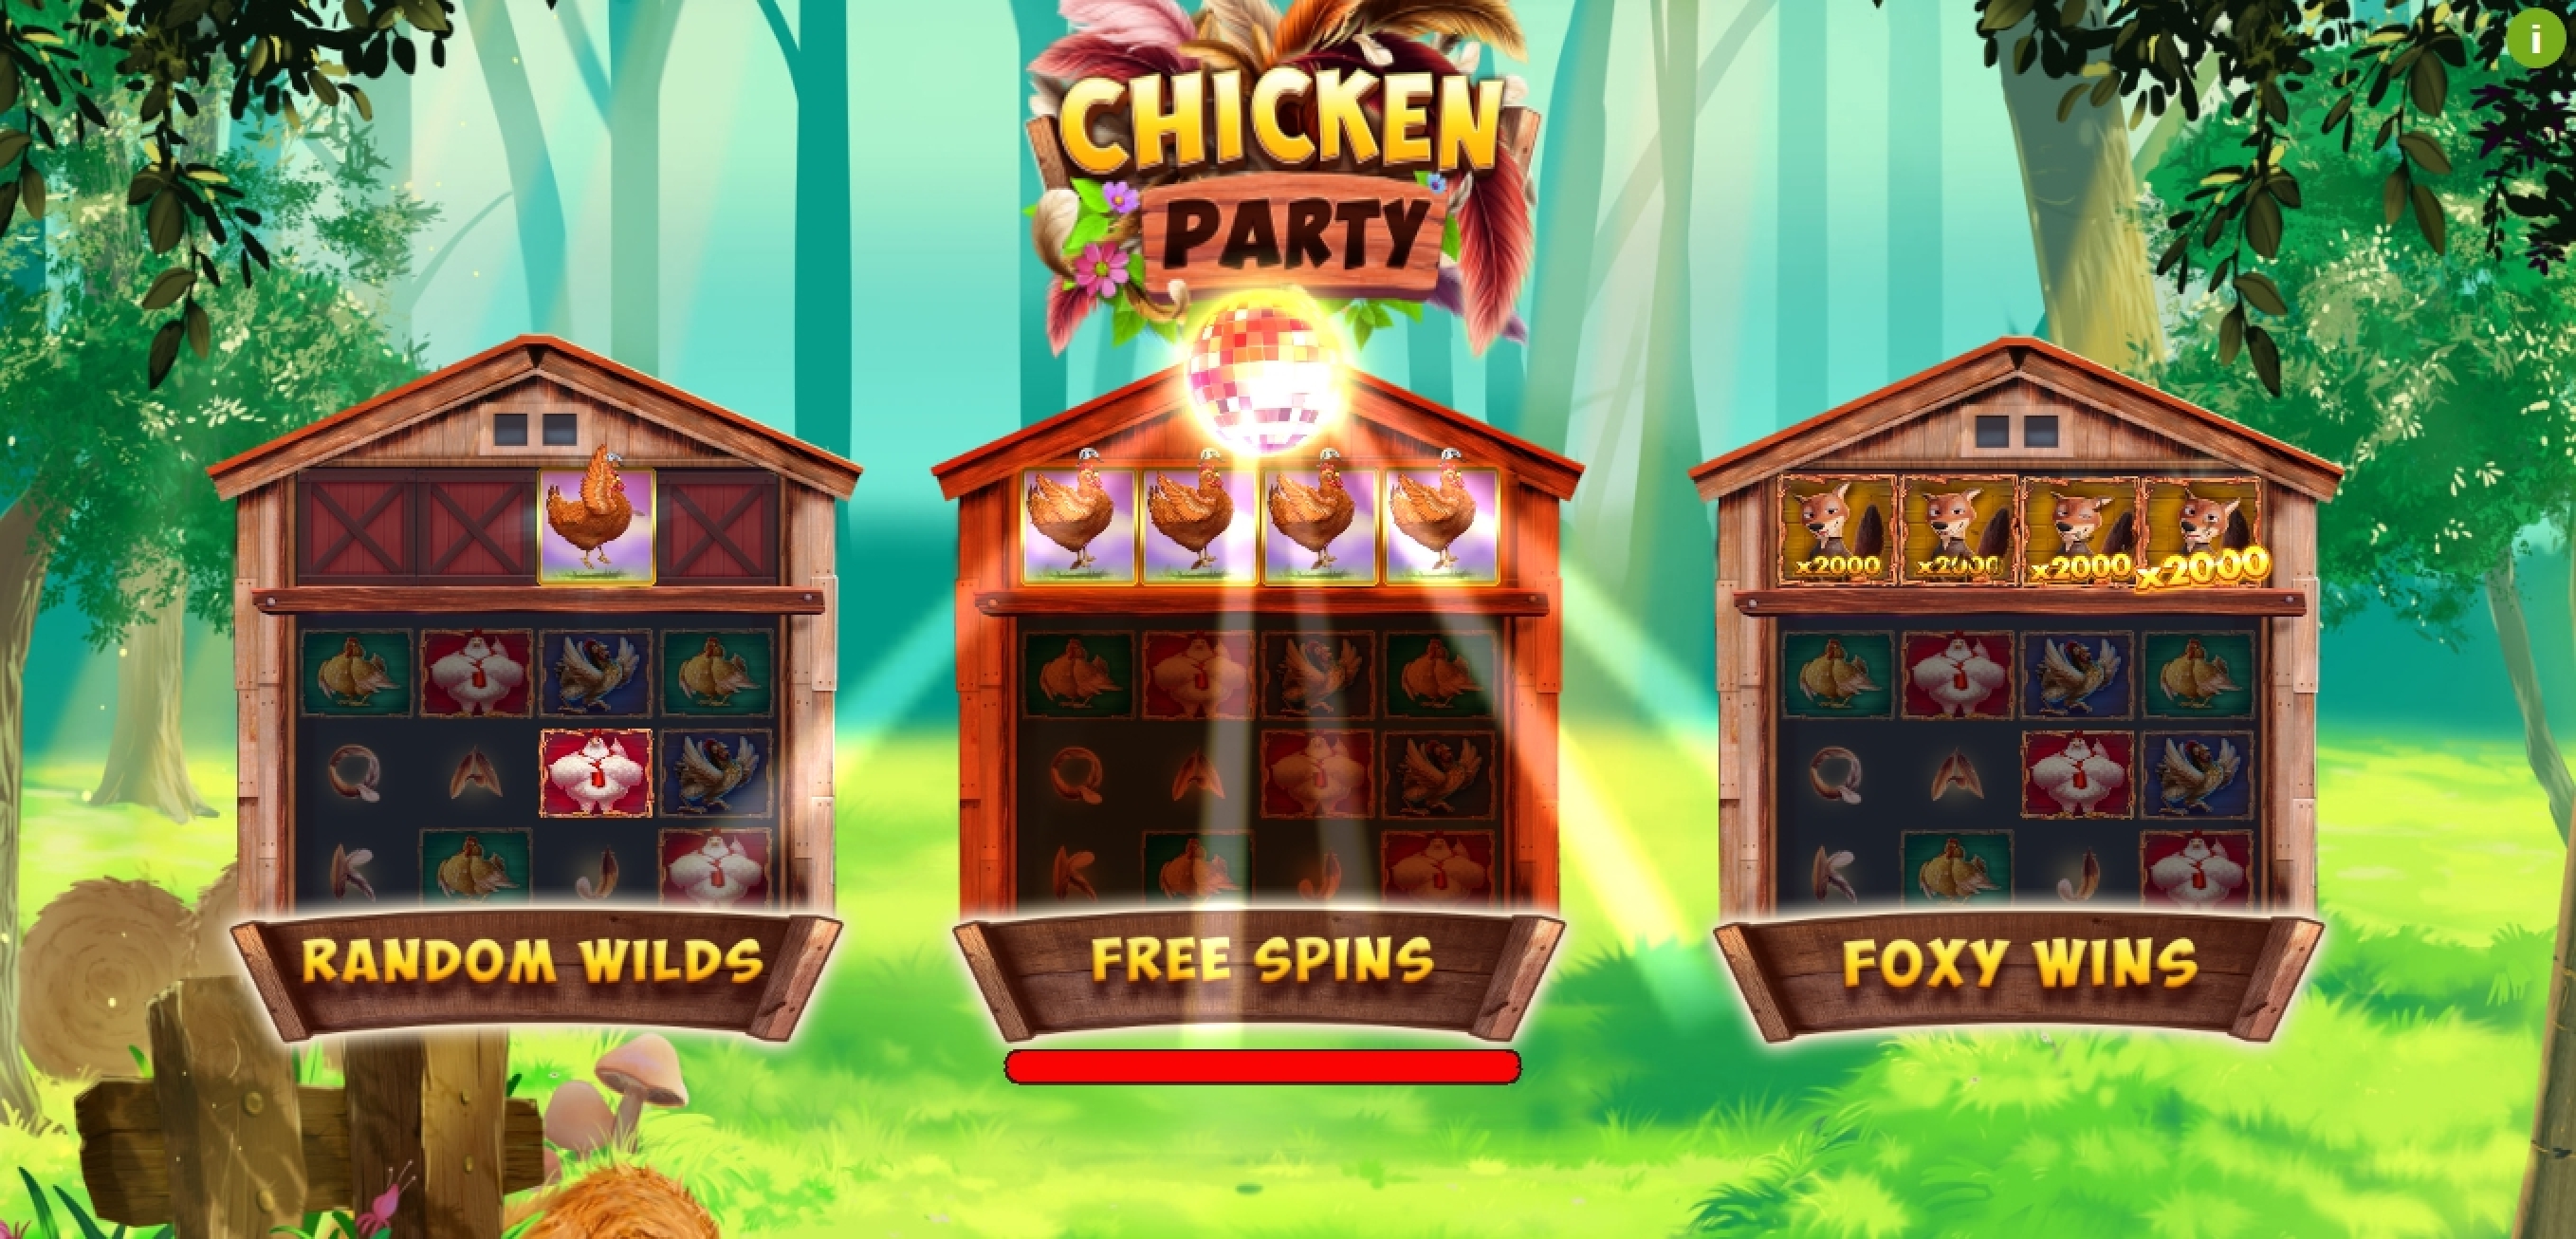 Play Chicken Party Free Casino Slot Game by Booming Games